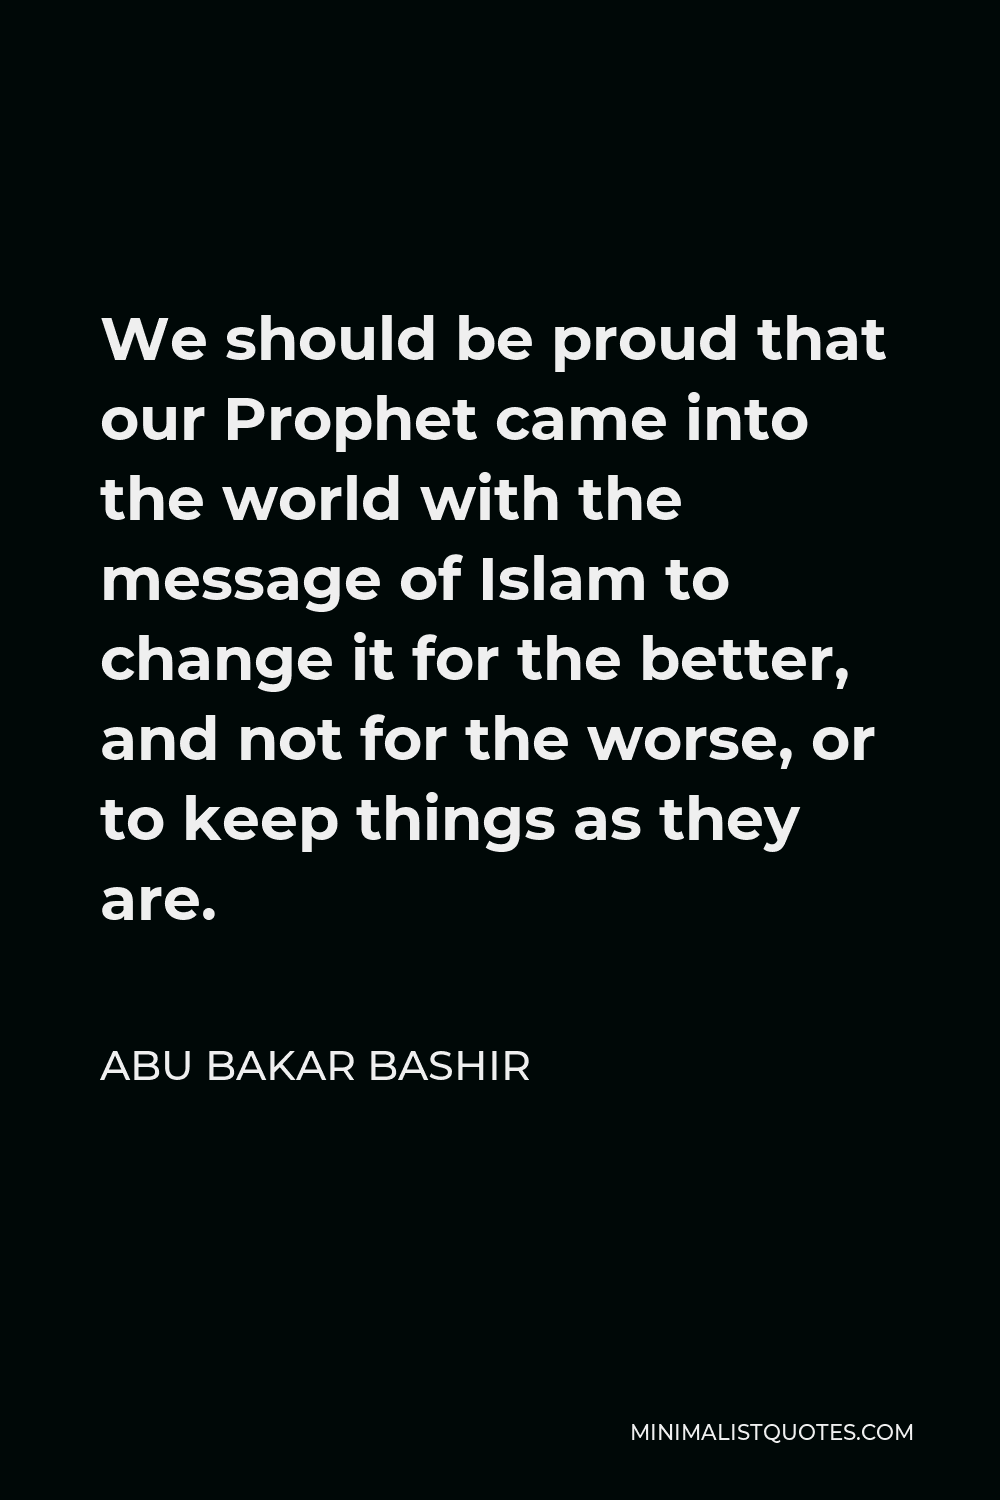 Abu Bakar Bashir Quote - We should be proud that our Prophet came into the world with the message of Islam to change it for the better, and not for the worse, or to keep things as they are.